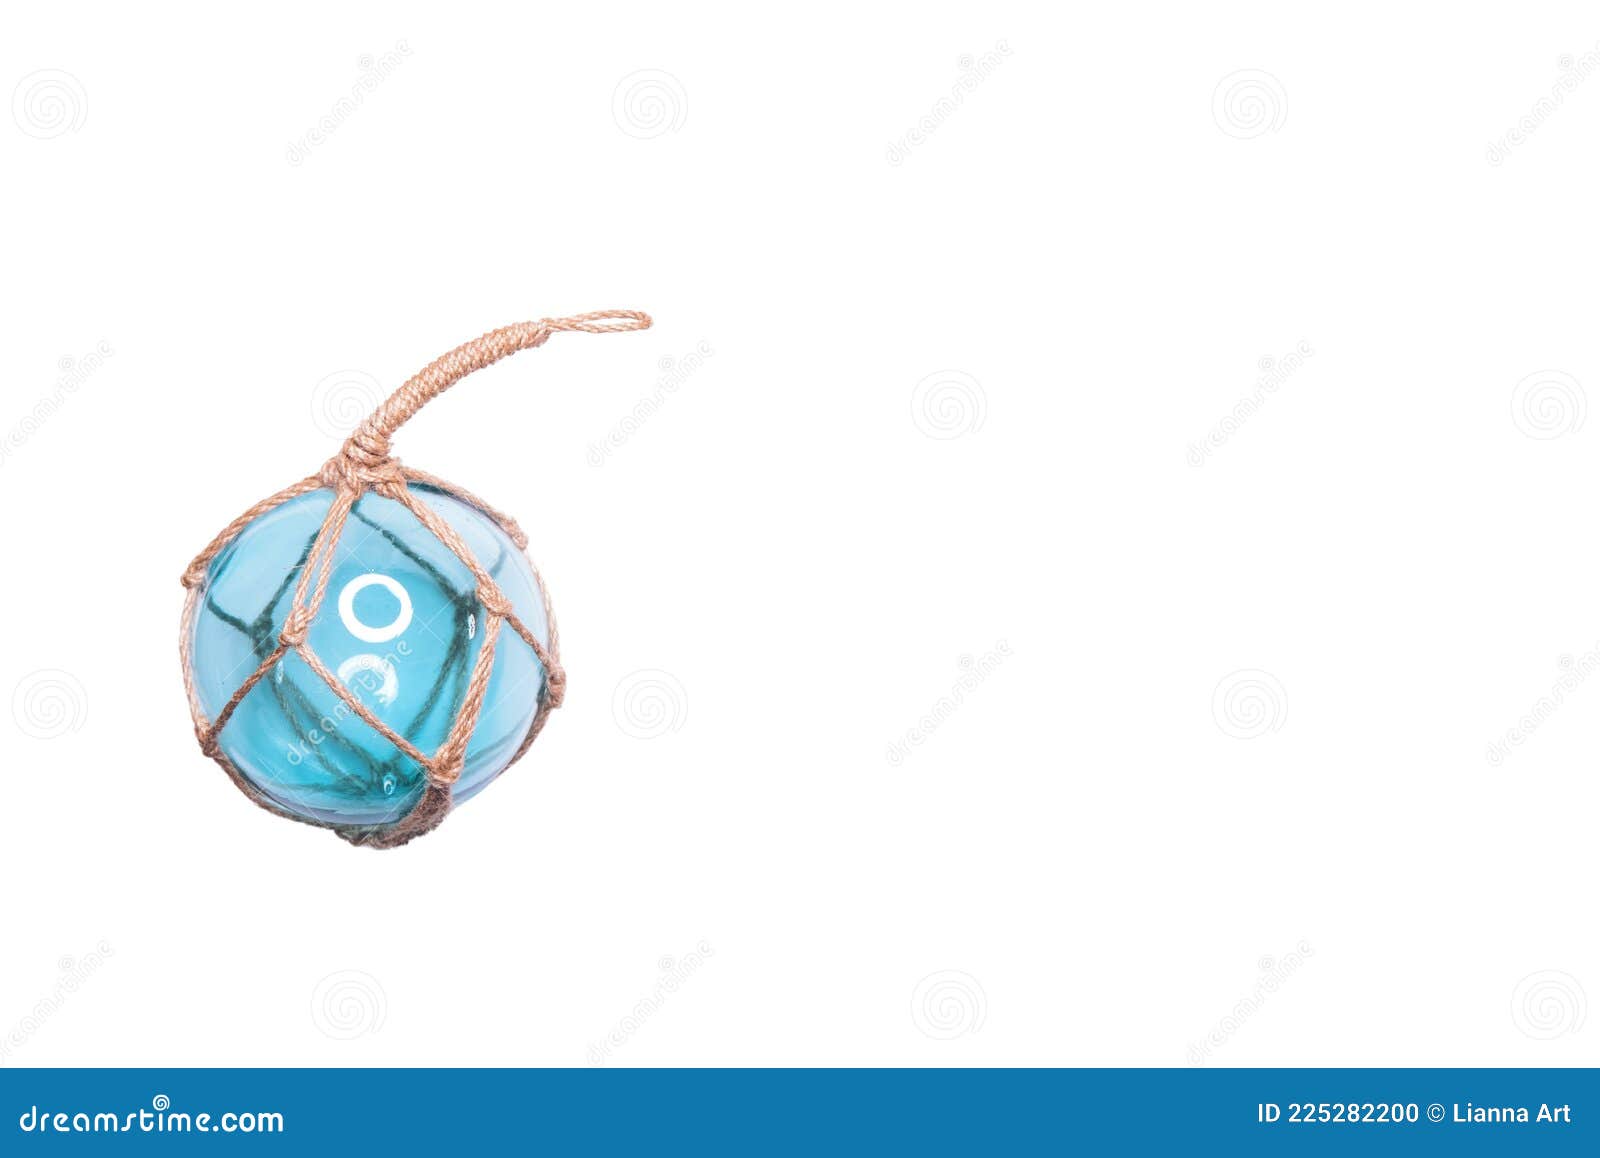 https://thumbs.dreamstime.com/z/glass-fishing-net-round-buoy-one-sphere-ropes-isolated-white-background-scandinavian-traditional-decor-225282200.jpg